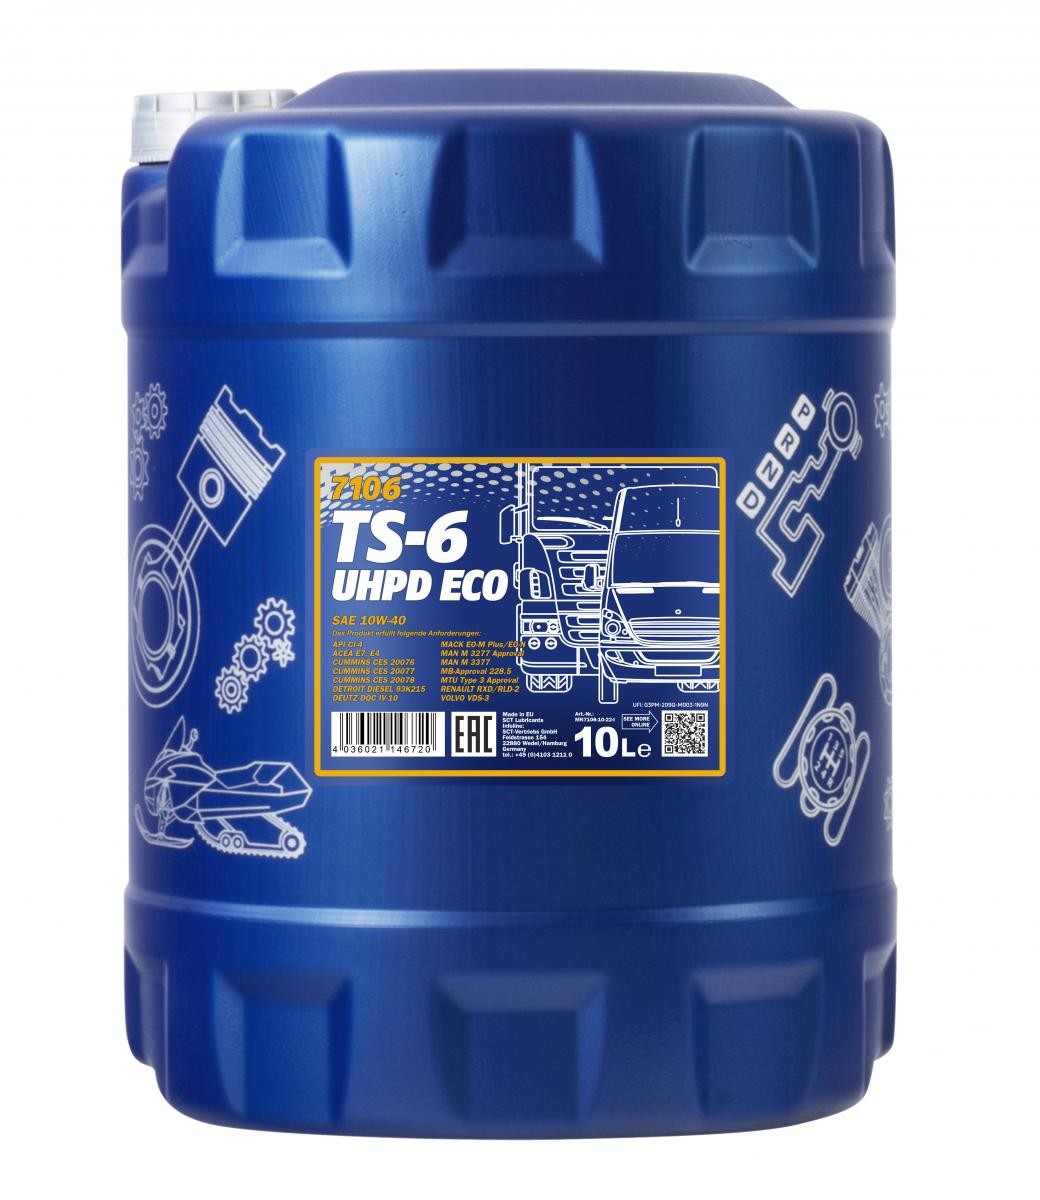 Engine oil Renault RXD MANNOL - MN7106-10 TS-6, UHPD Eco